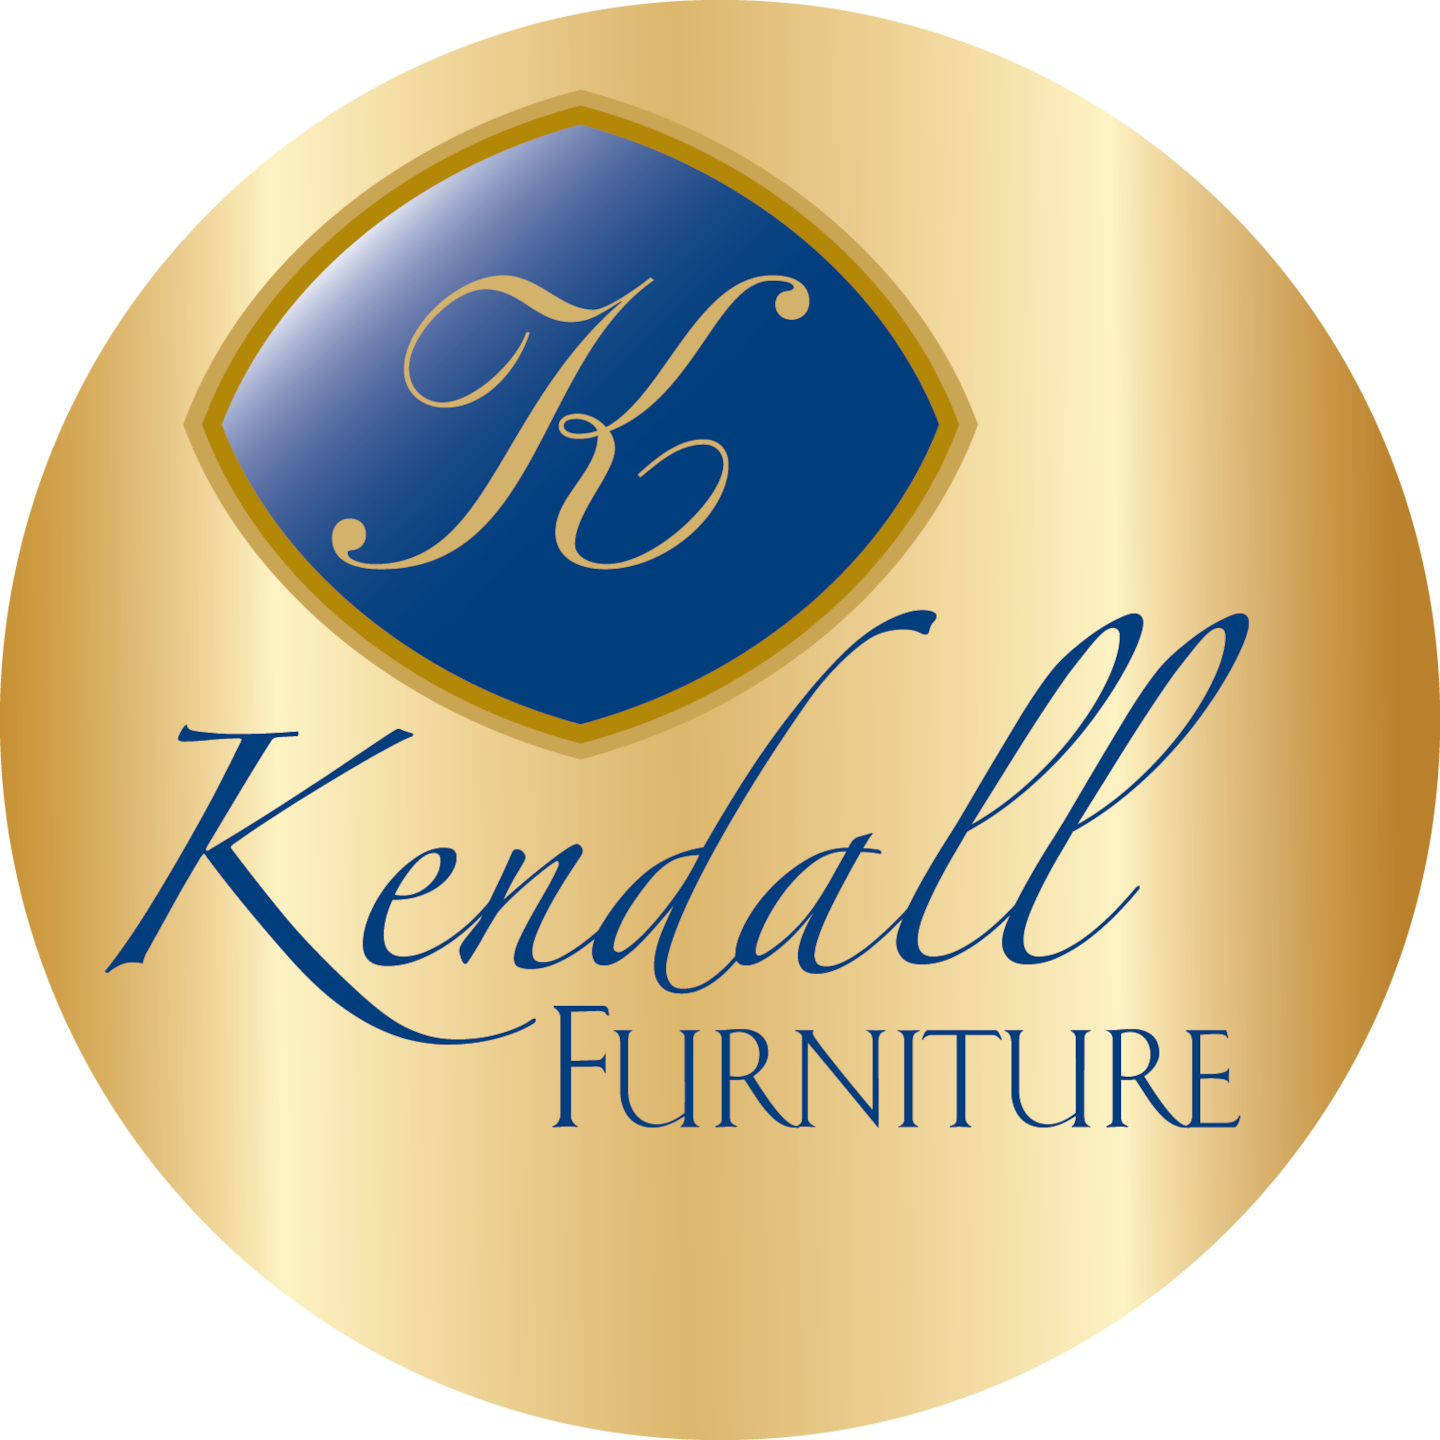 Profile Image of Pro Kendall Window Coverings -Kendall Furniture